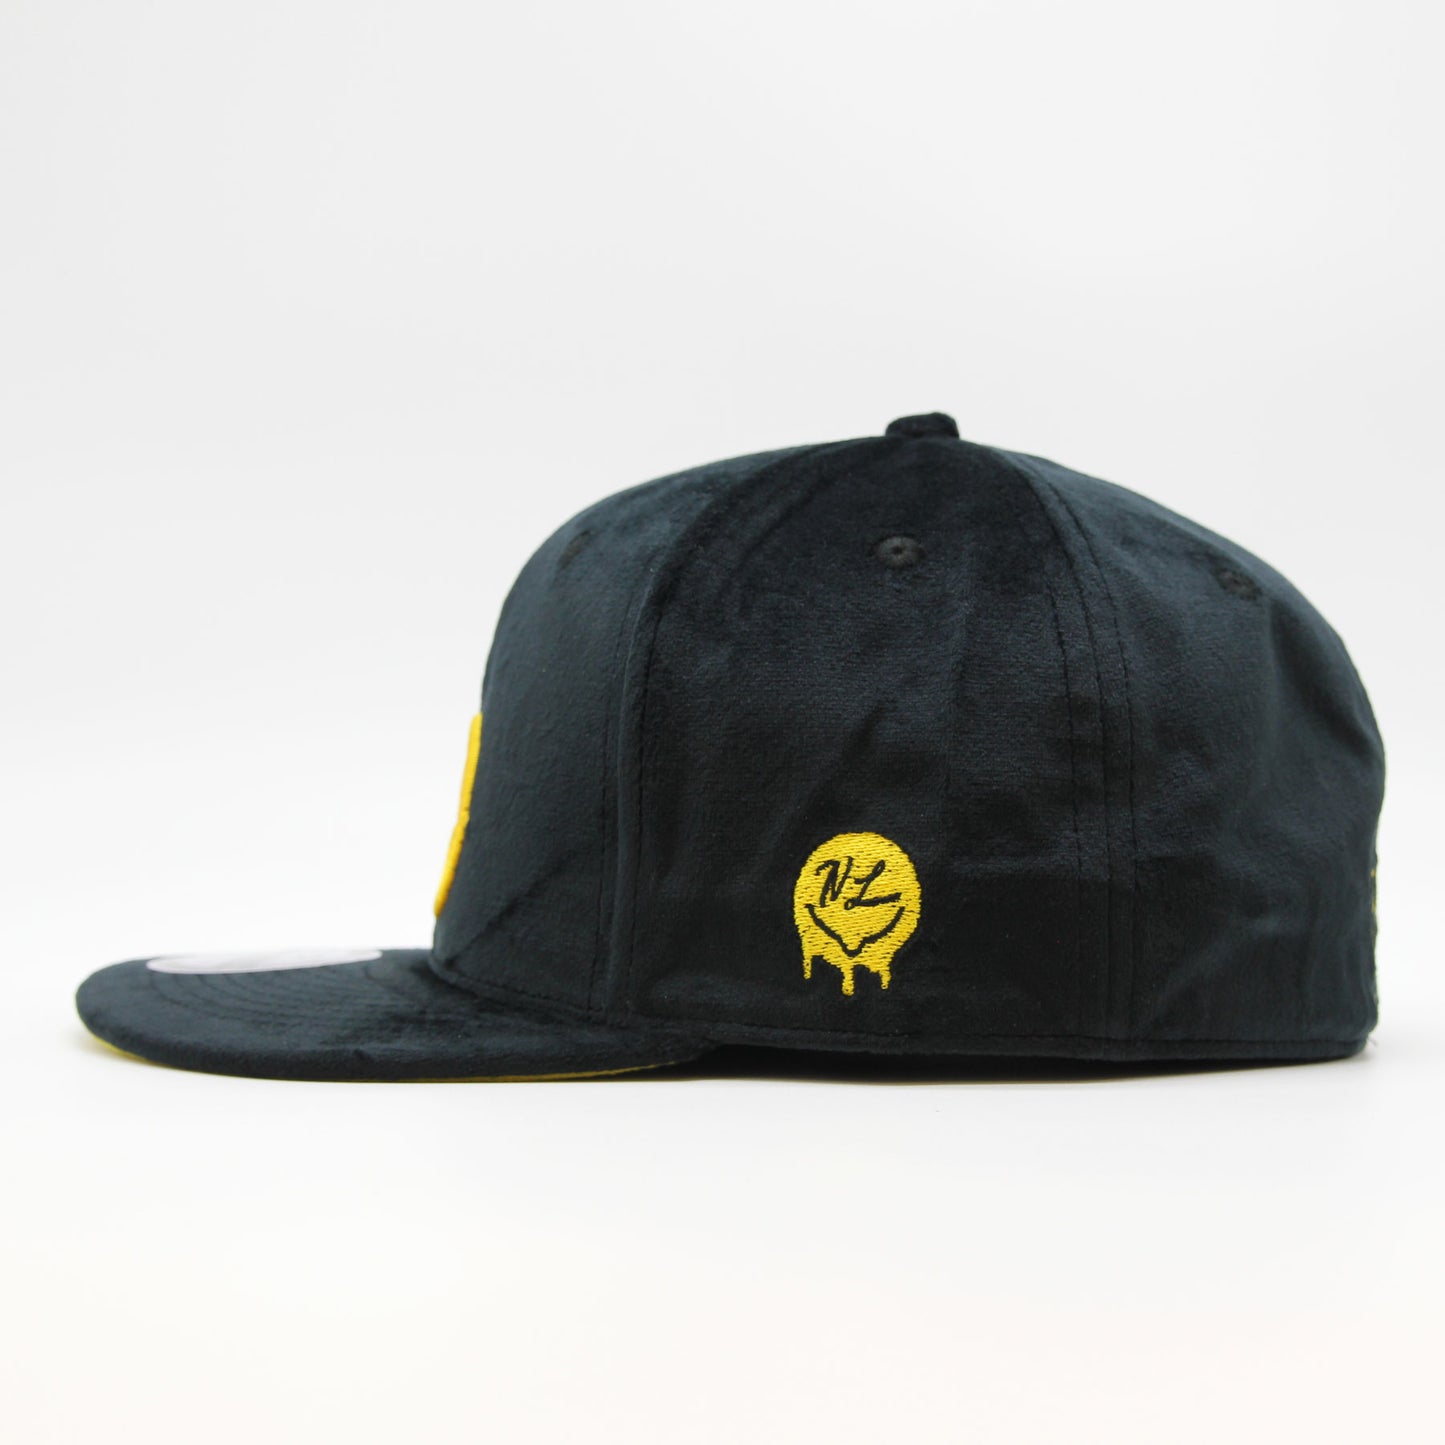 Naughty League Las Vegas Gold Diggers fitted velvet black/gold